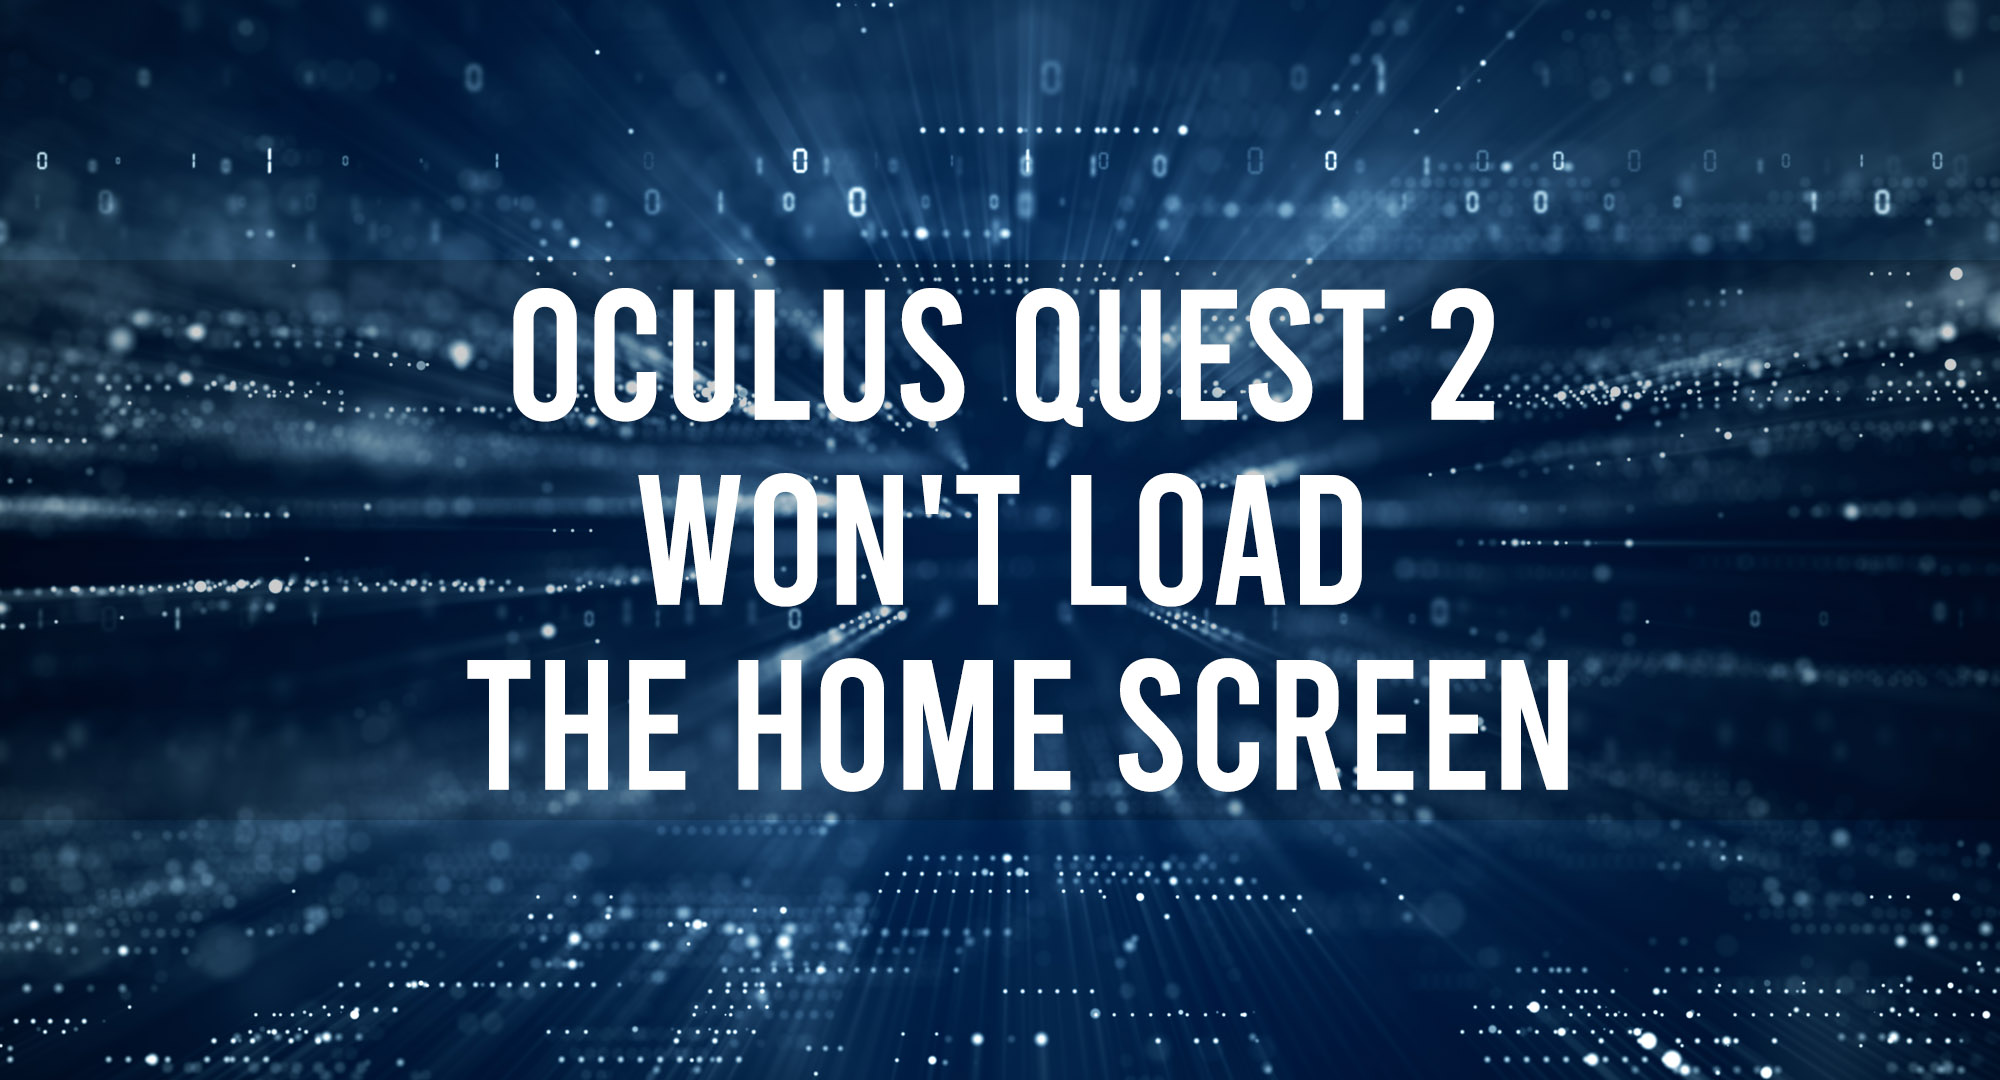 Oculus Quest 2 Won't Load The Home Screen